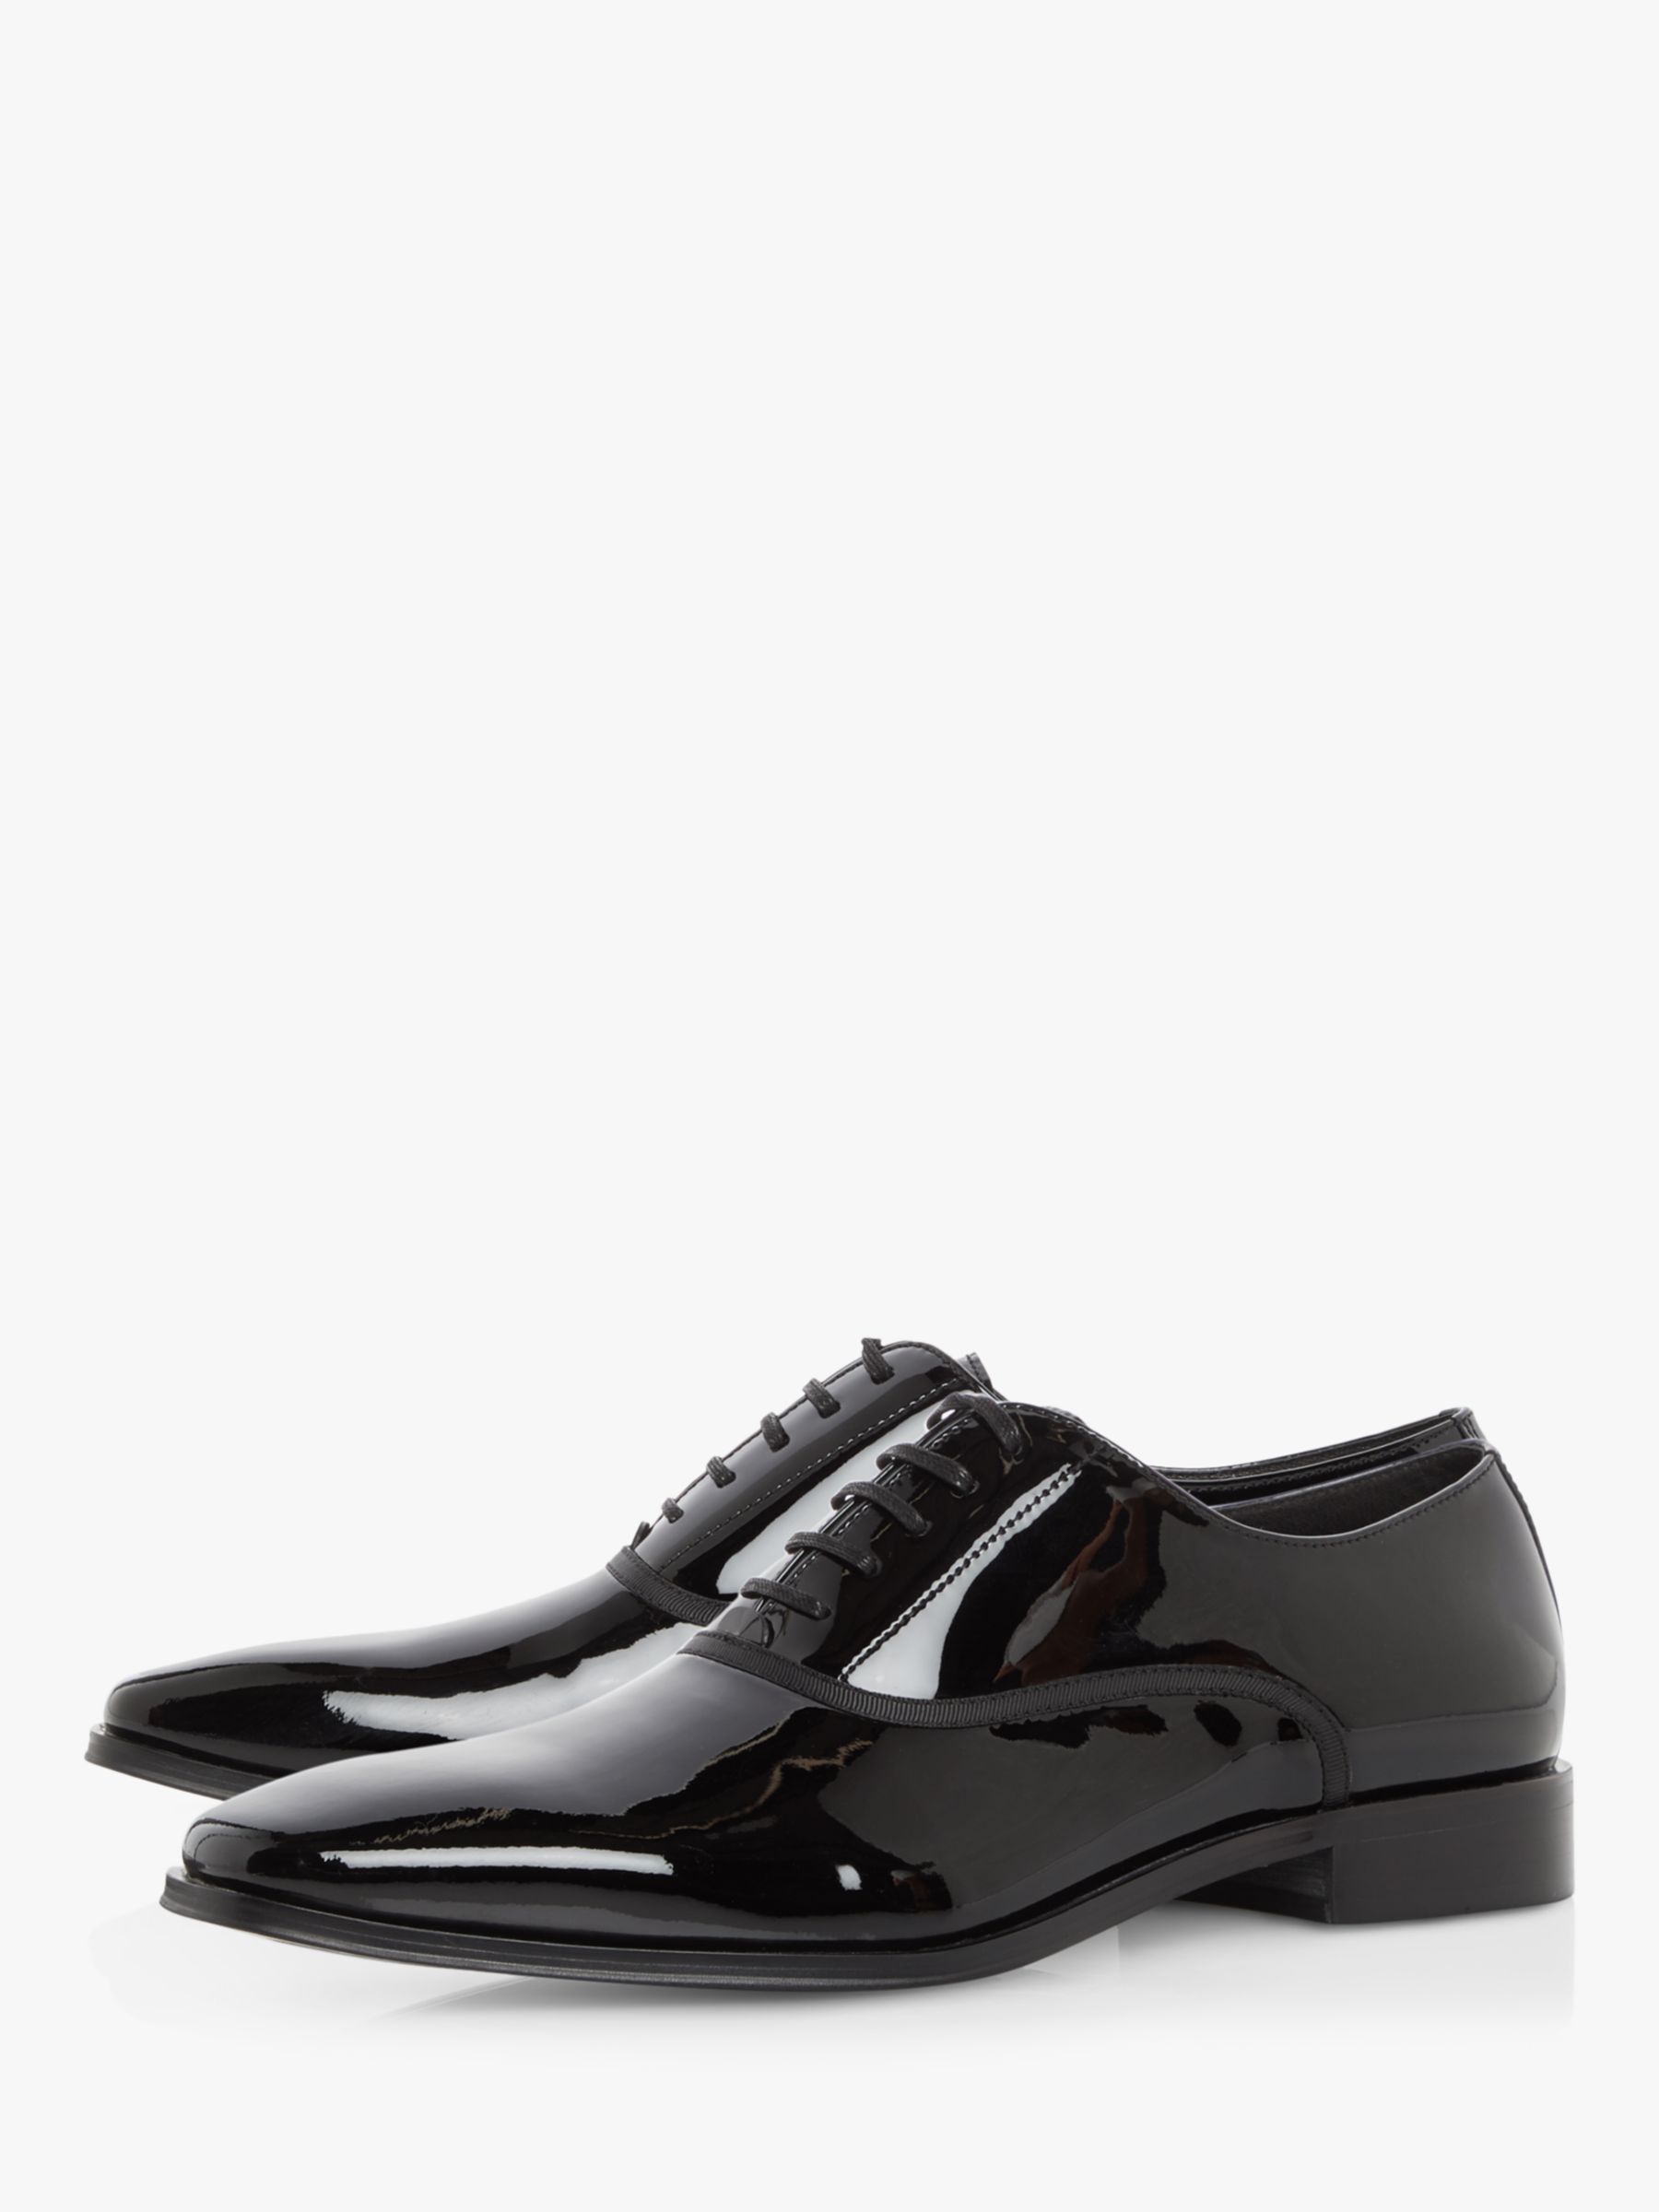 Dune Swan Patent Leather Oxford Shoes, Black, 7